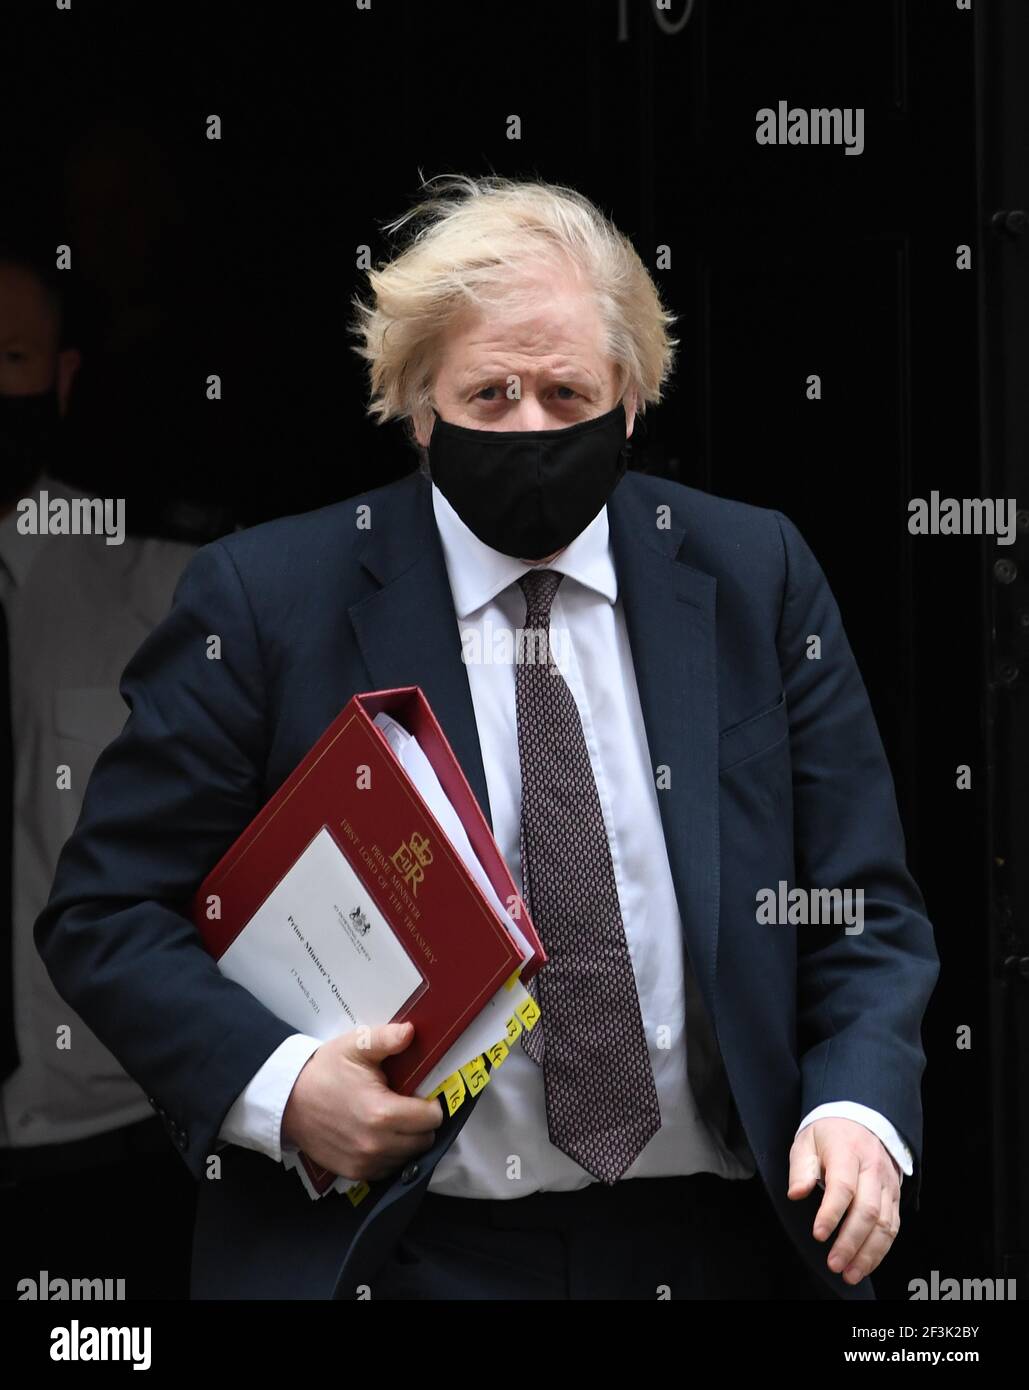 Prime Minister Boris Johnson leaves 10 Downing Street to attend Prime Minister's Questions at the Houses of Parliament, London. Picture date: Wednesday March 17, 2021. Stock Photo